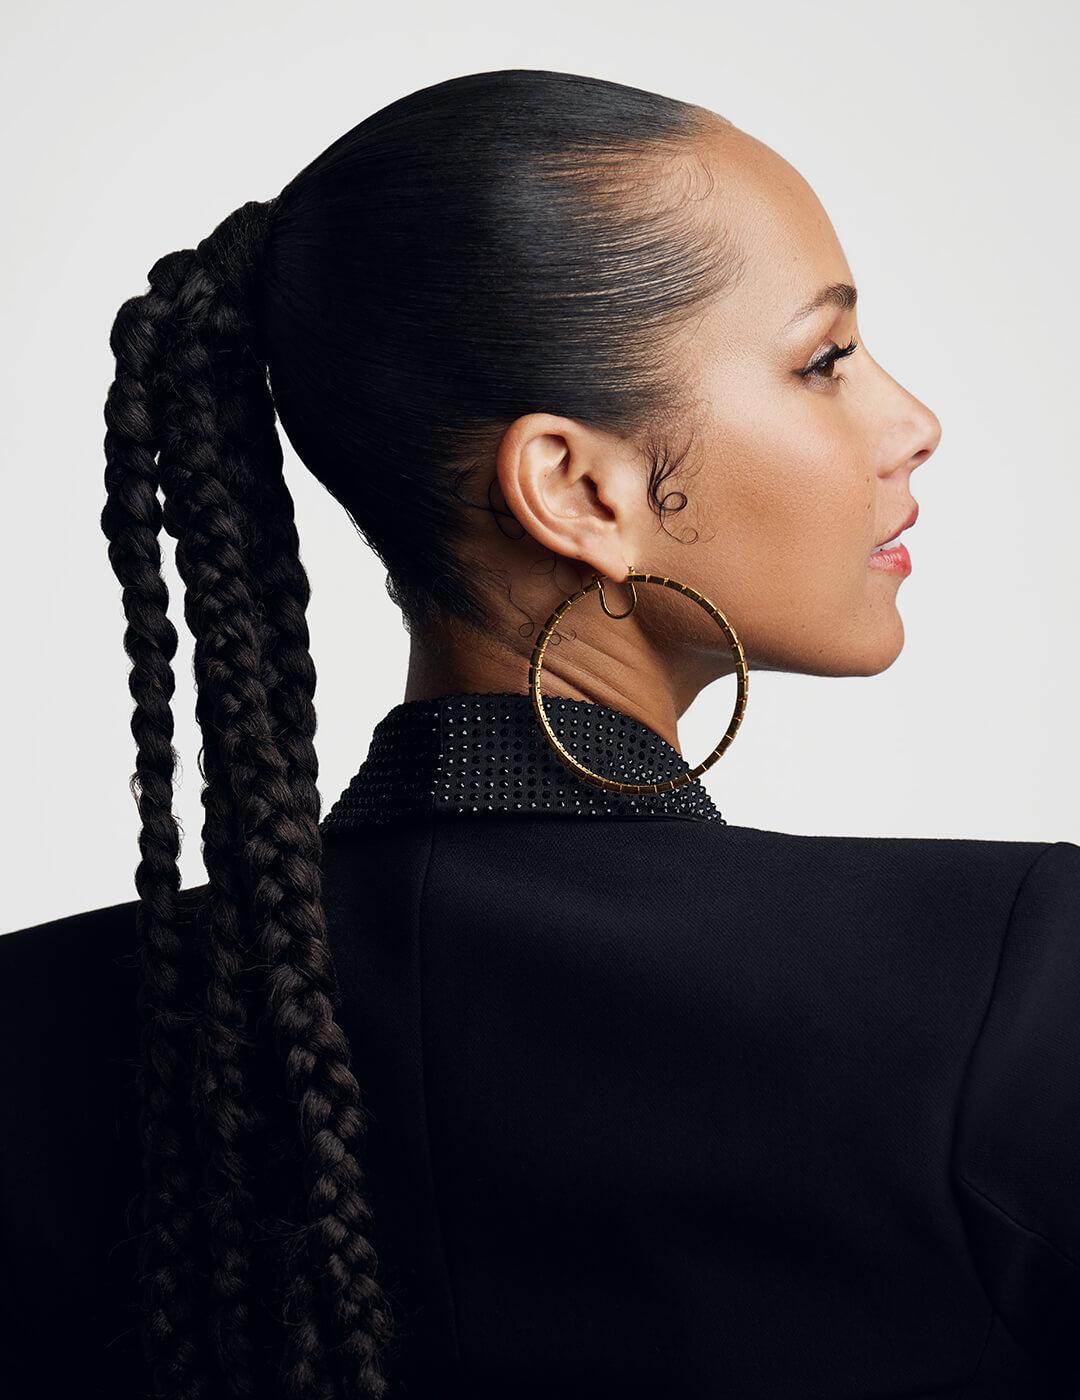 Portrait of Alicia Keys with her back to the camera